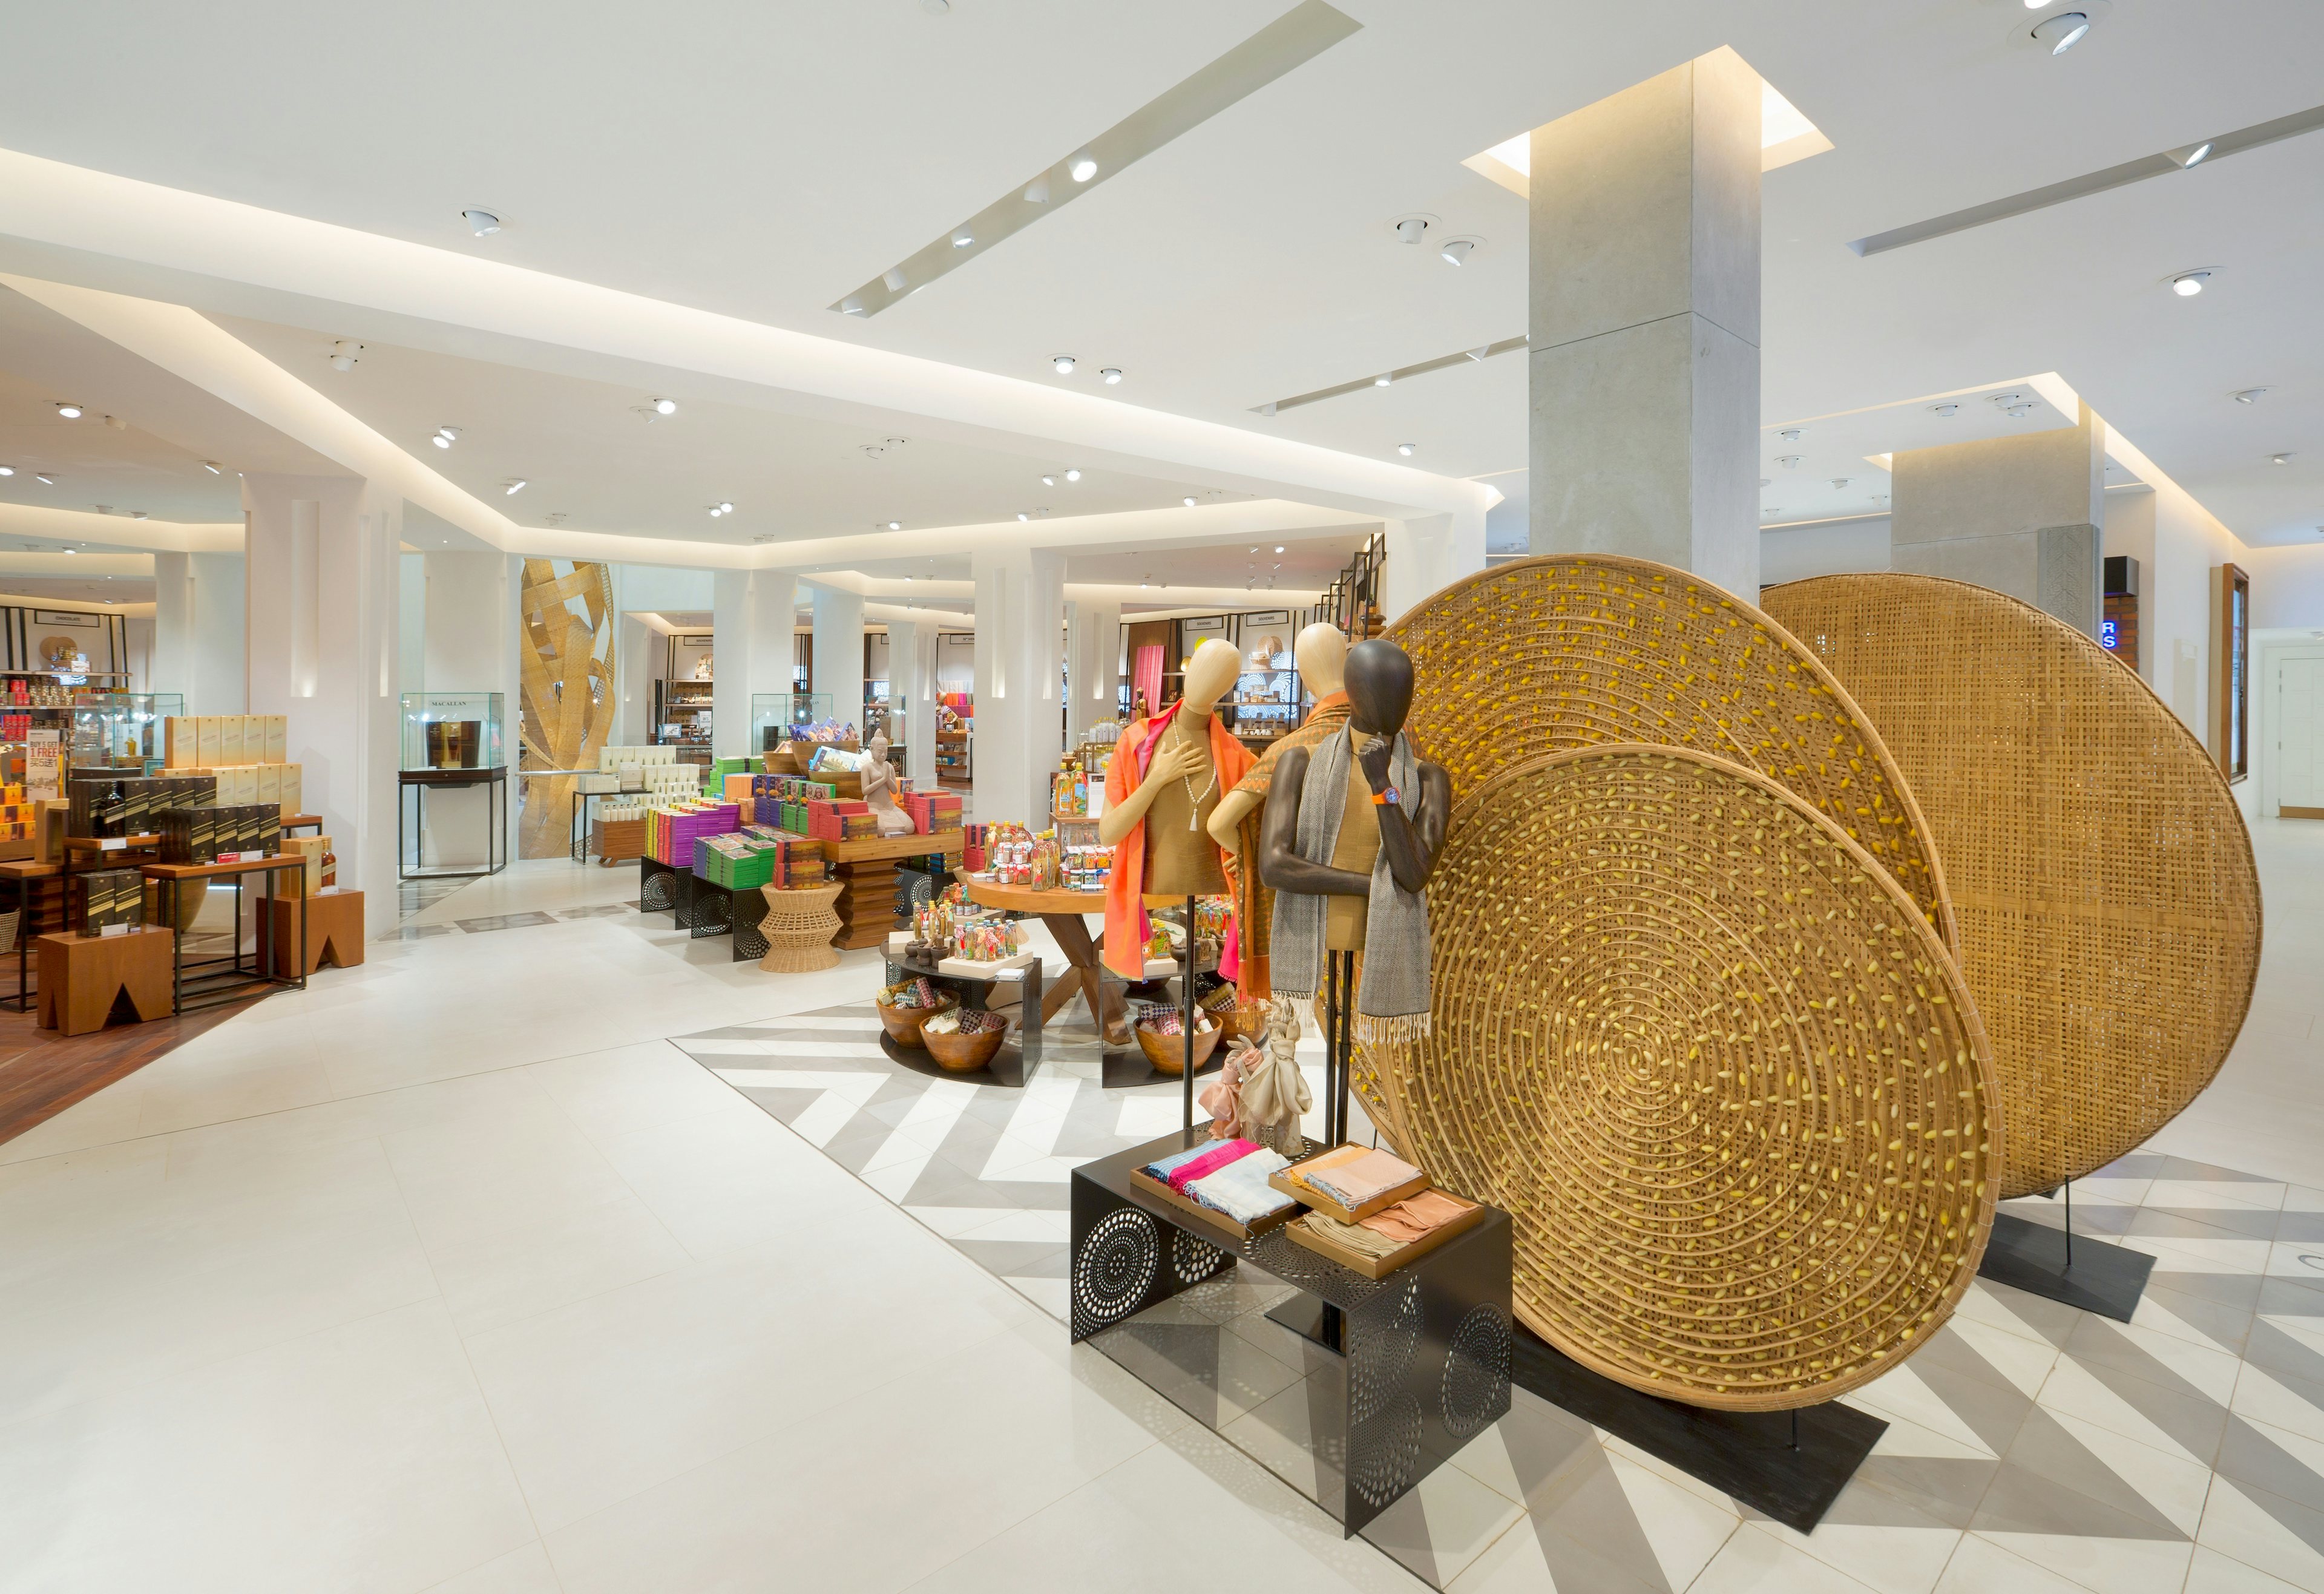 The new T Galleria in Siem Reap stocks both international luxury brands and traditional Cambodian handicrafts. (Courtesy Photo)